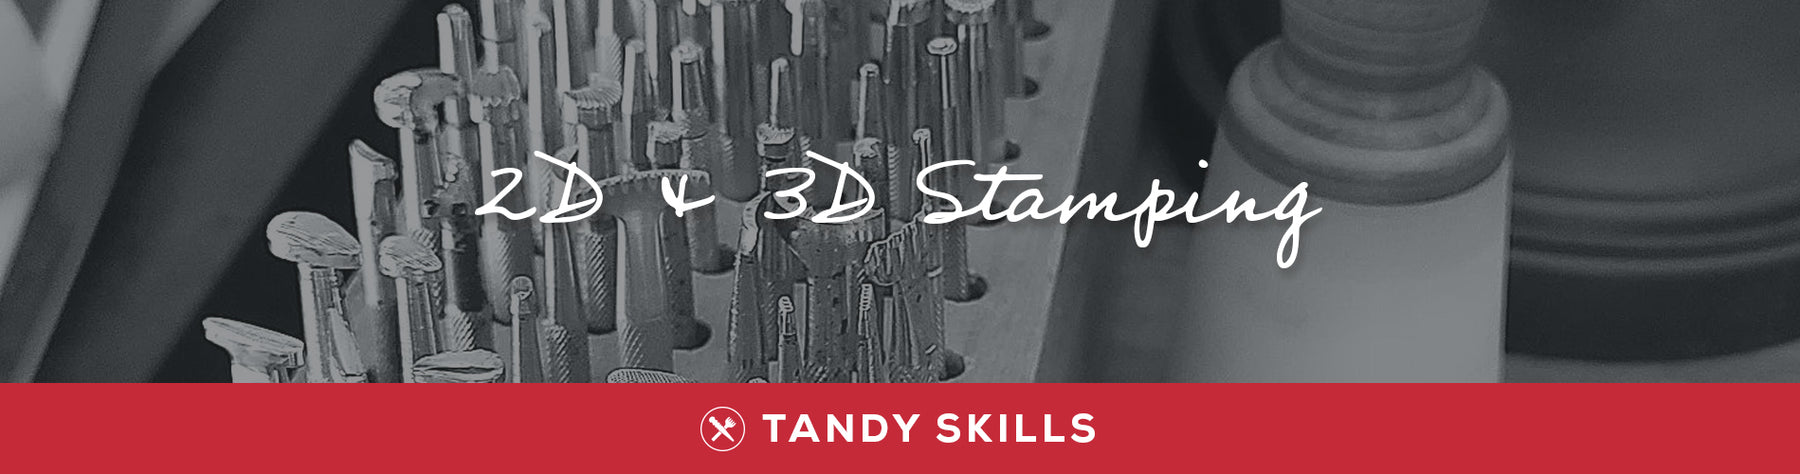 Tandy Skills: 2D & 3D Stamping